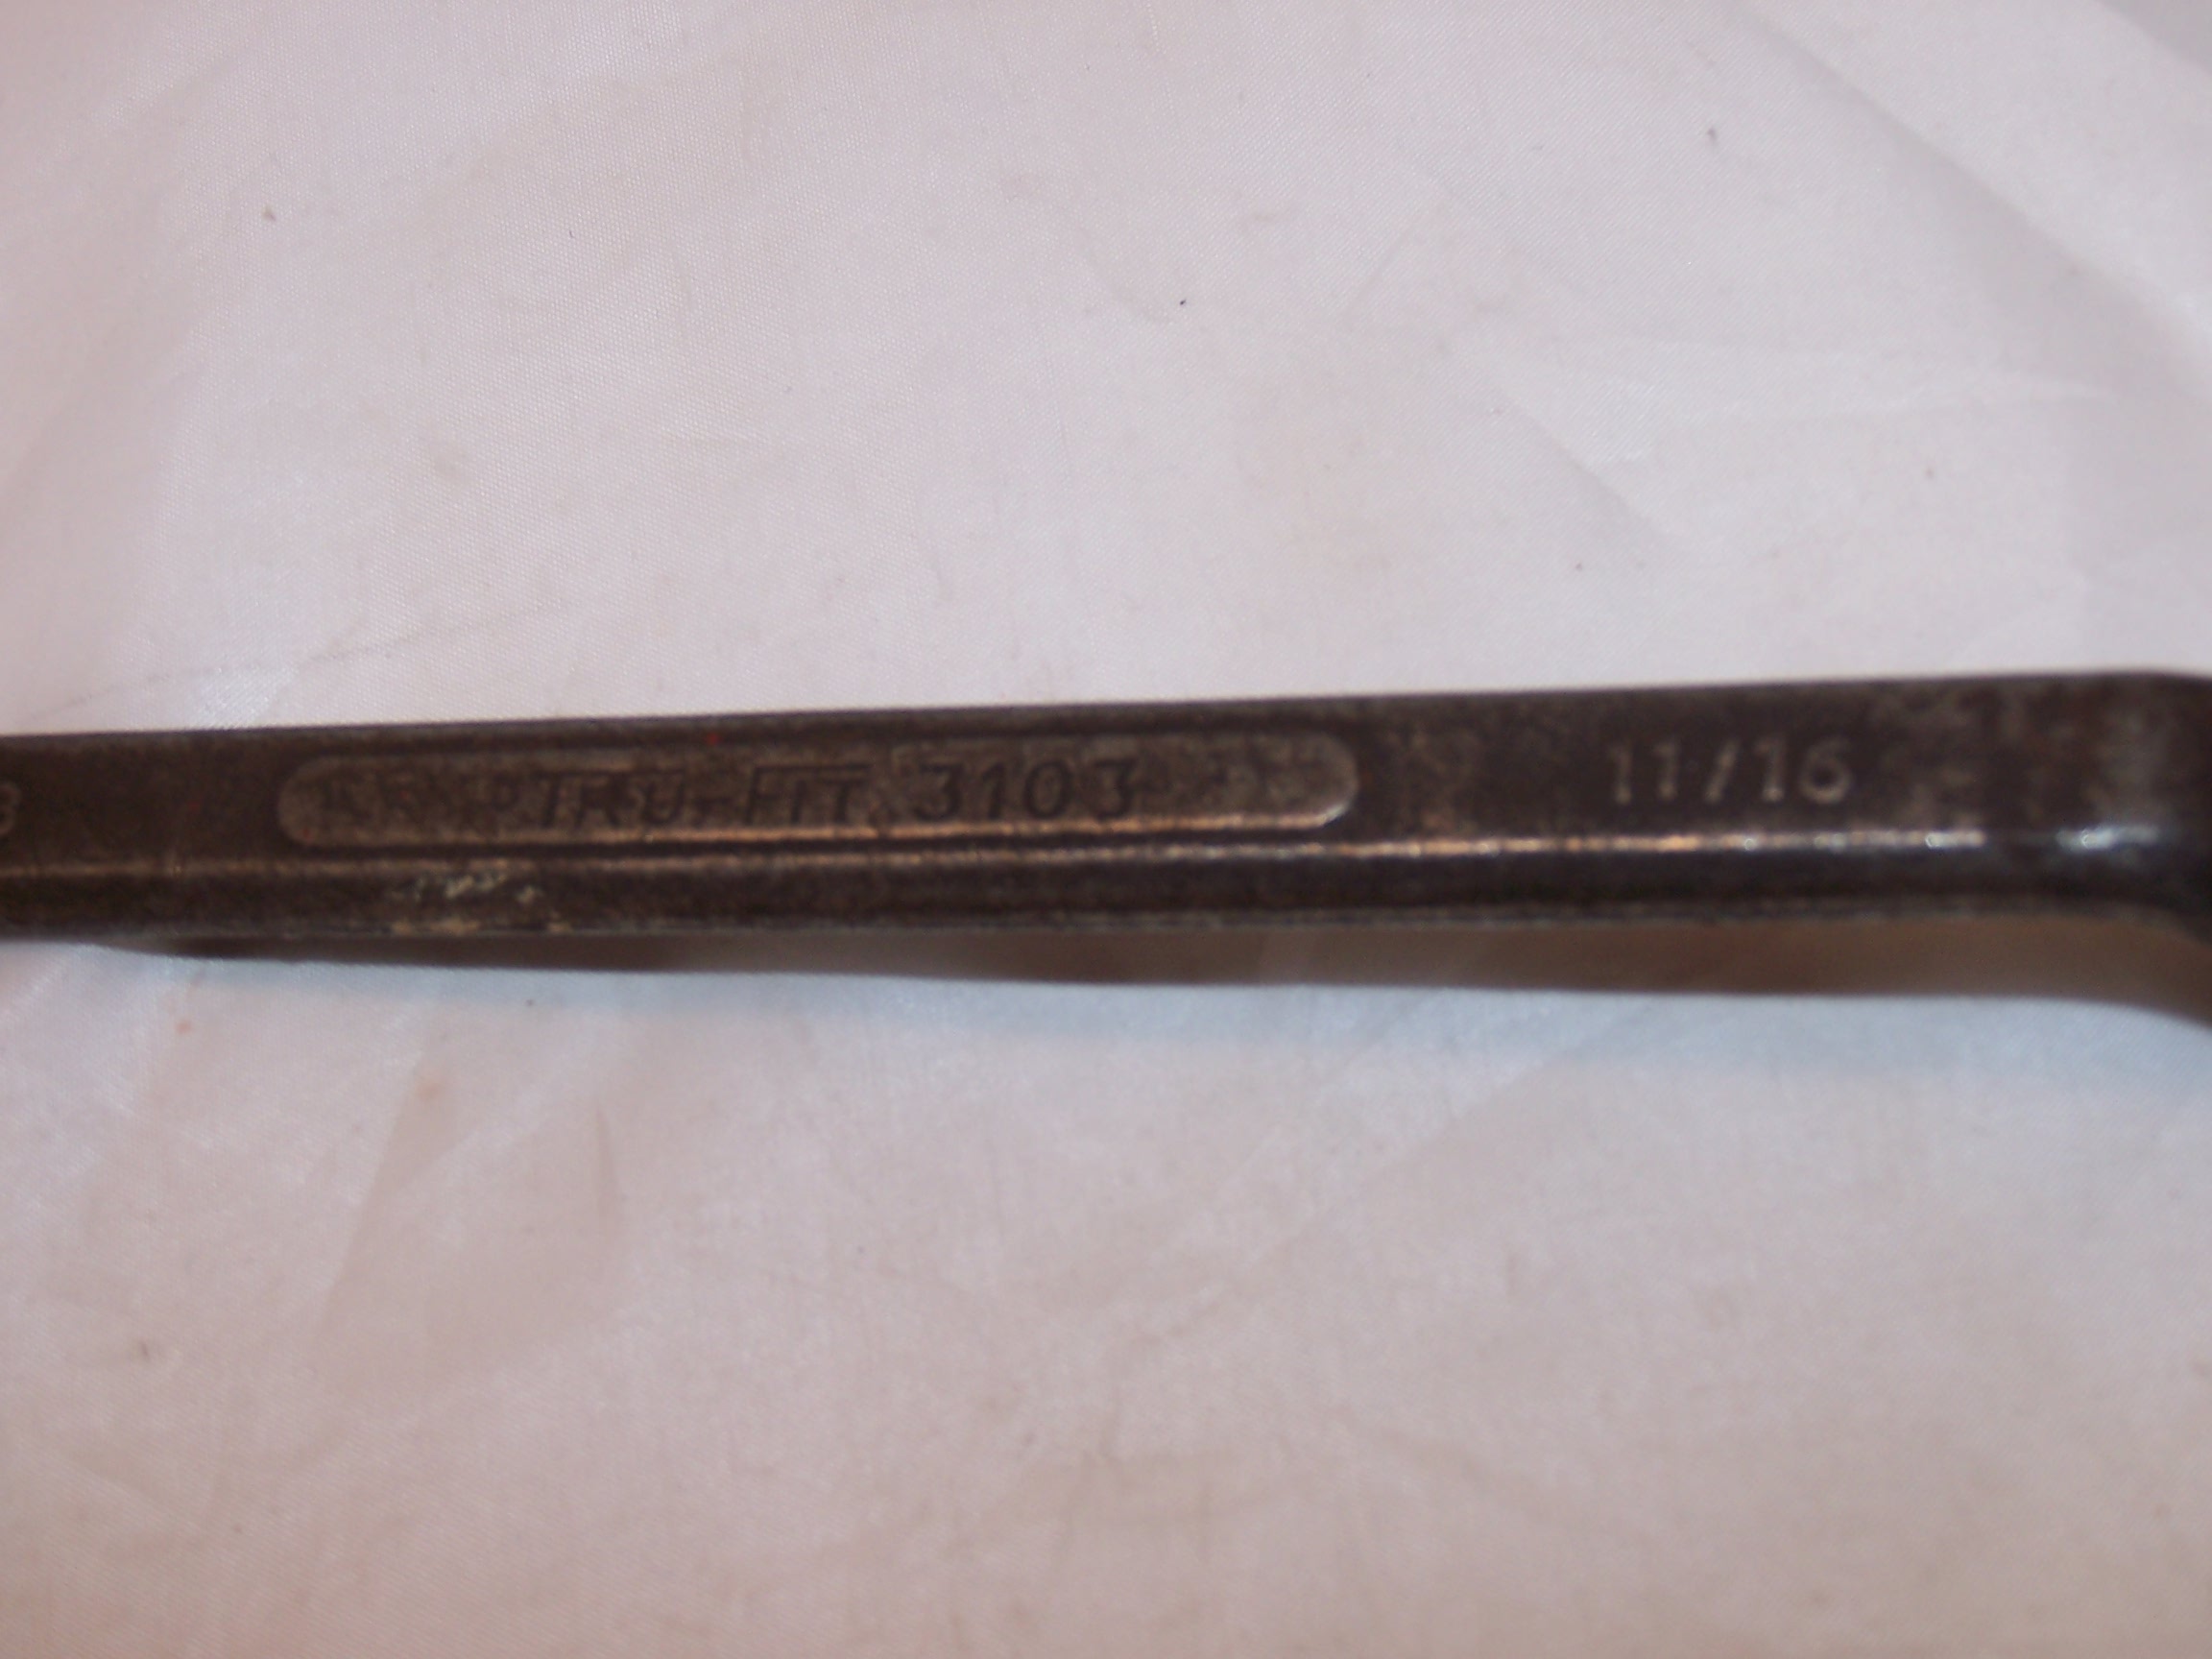 Image 2 of Lectrolite Offset Box End Wrench, Made in U.S.A.